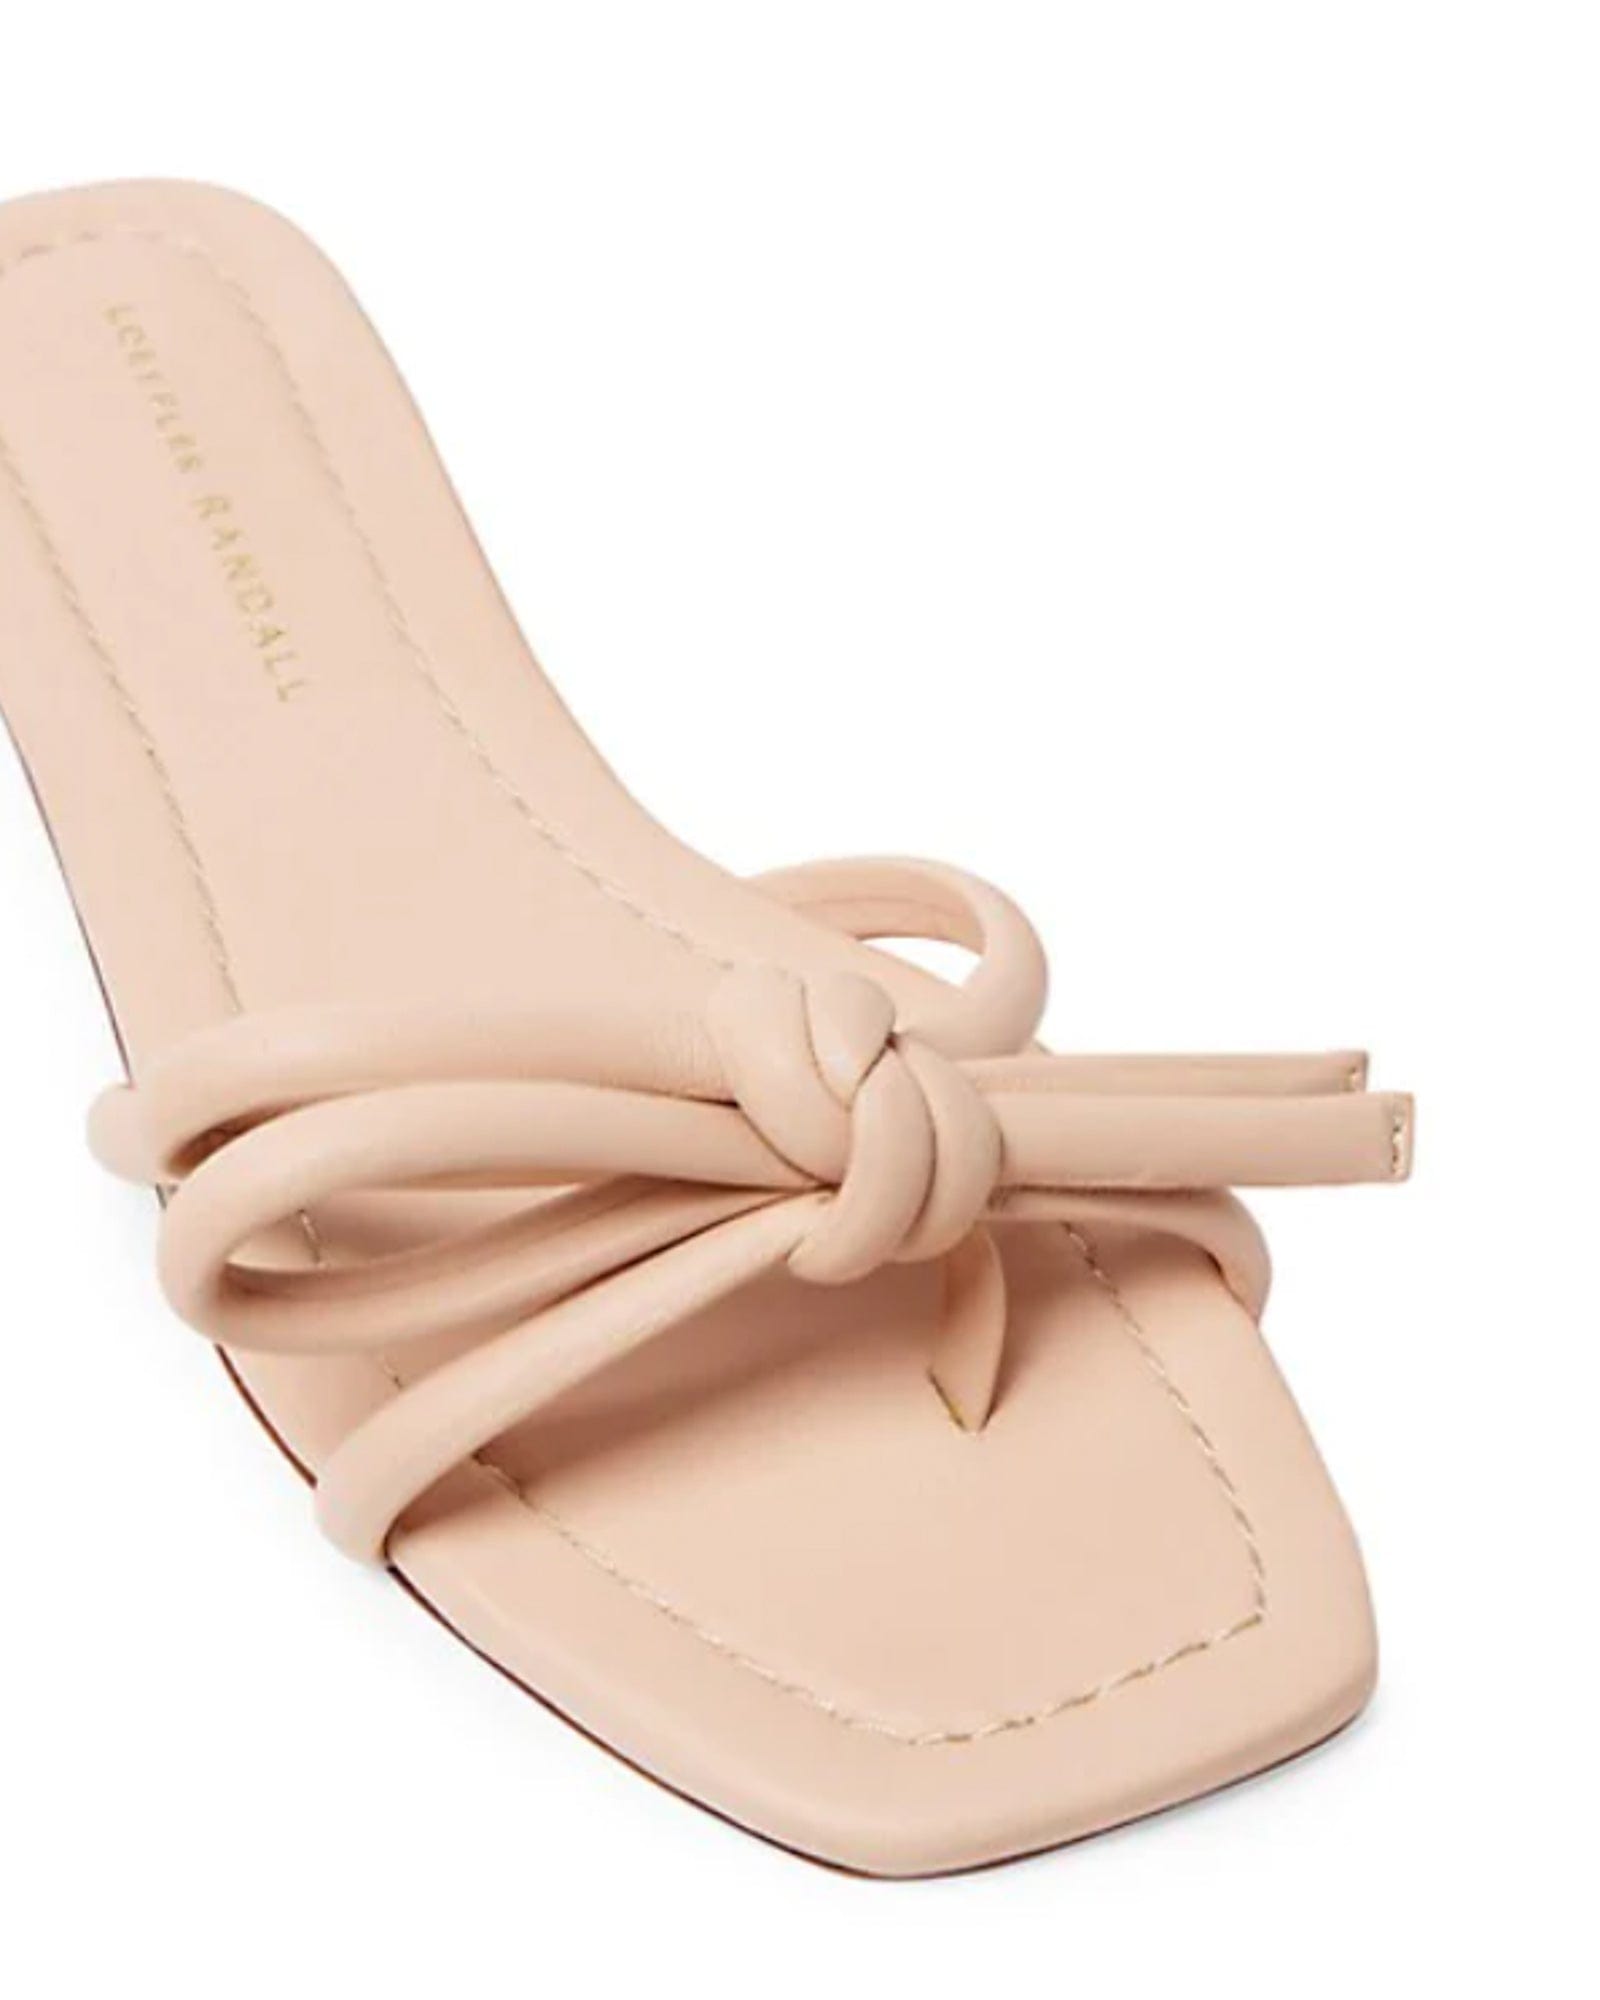 Hadley Leather Bow Sandals - The Revury